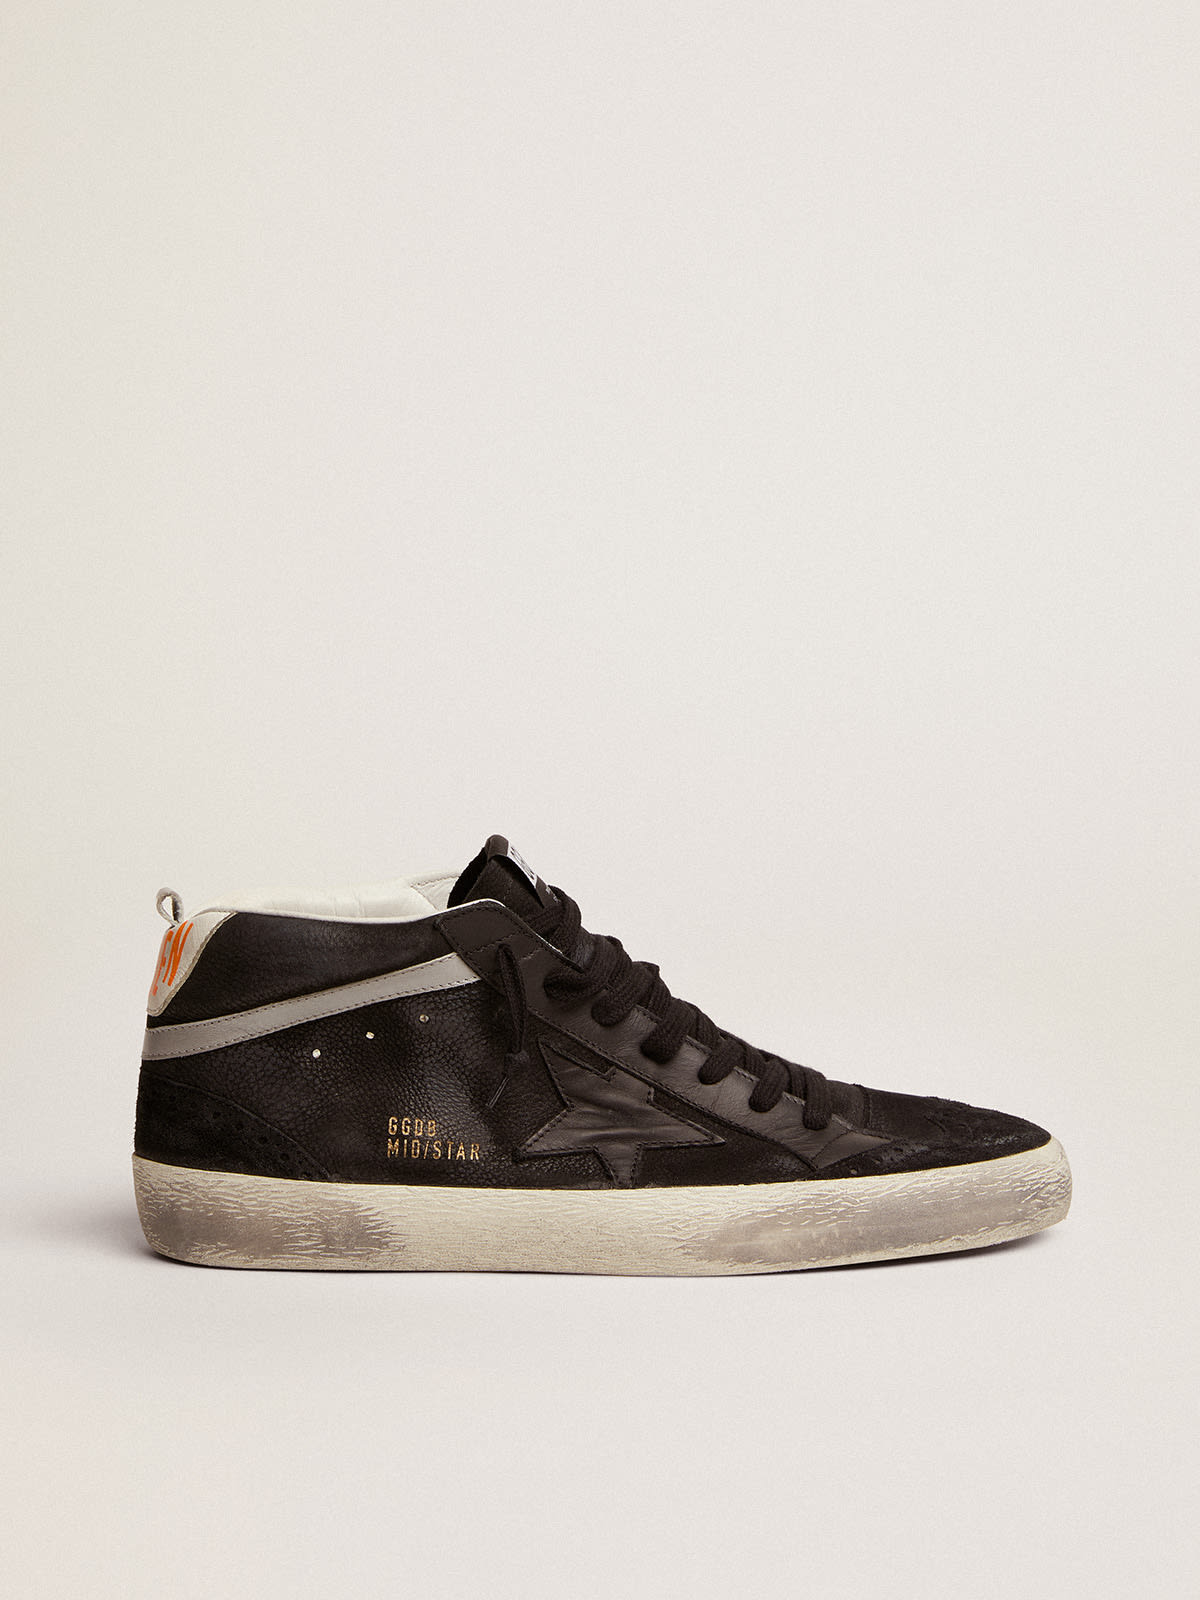 Mid Star sneakers in black nubuck with black leather star and 